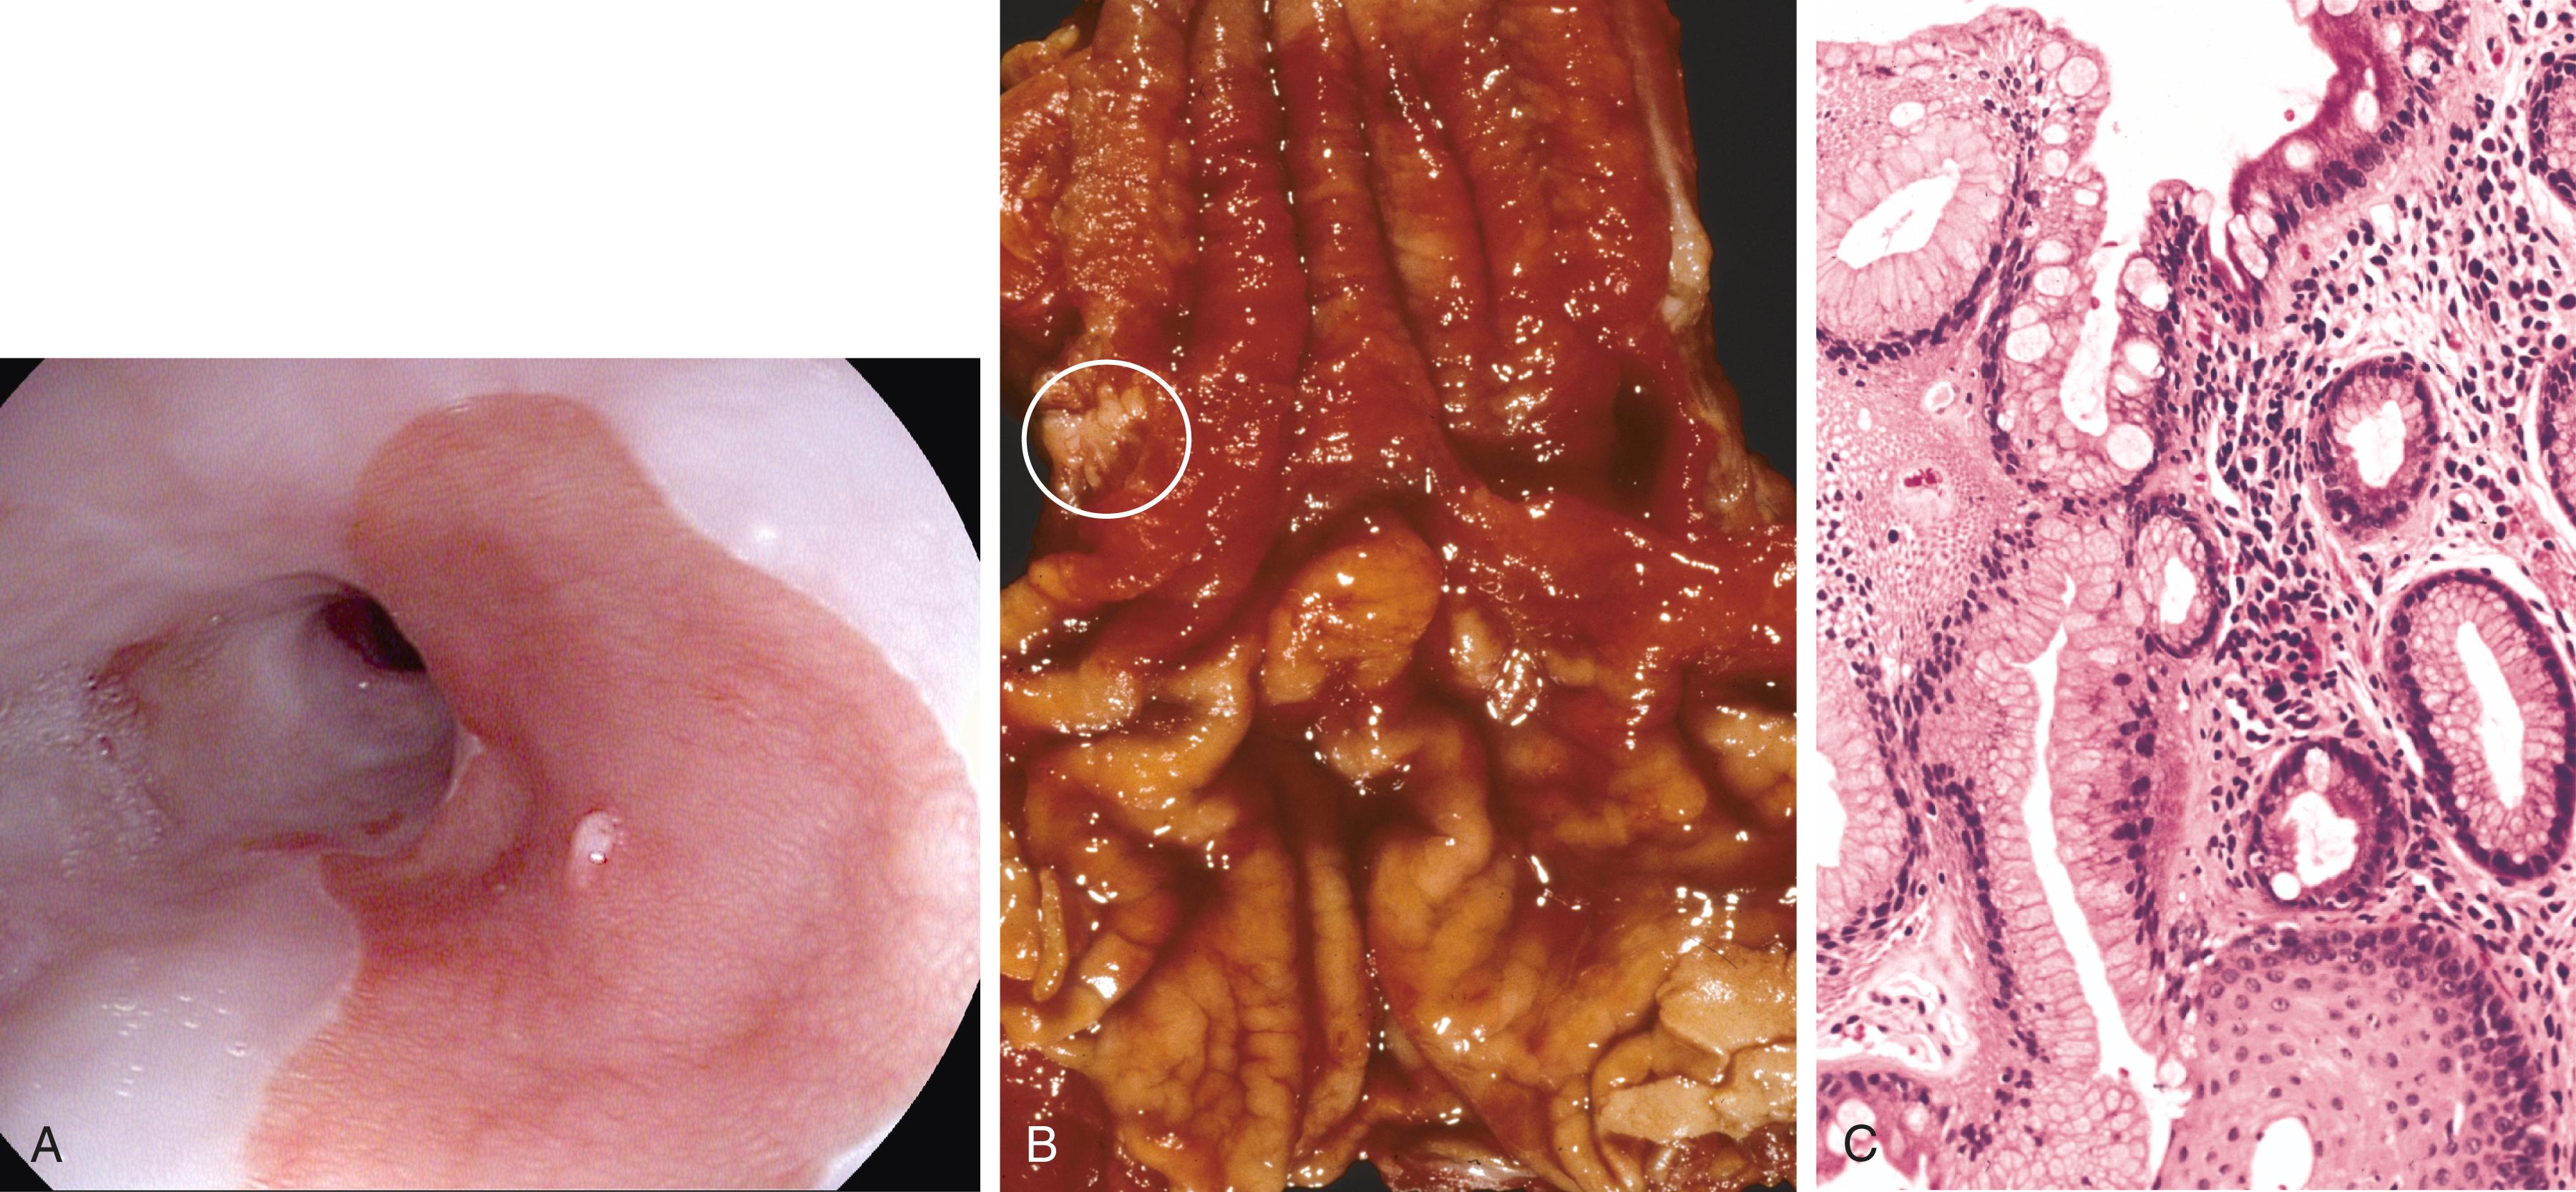 FIG. 13.10, Barrett esophagus. (A) Barrett esophagus at endoscopy, seen as a patch of reddish mucosa. (B) Gross image of Barrett esophagus (compare to Fig. 13.7 C). Only a focal area of paler squamous mucosa (circle) remains within the predominantly metaplastic, reddish mucosa of the distal esophagus. (C) Histologic appearance of the gastroesophageal junction in Barrett esophagus. Note the transition between esophageal squamous mucosa (lower right) and metaplastic mucosa containing goblet cells (upper) .